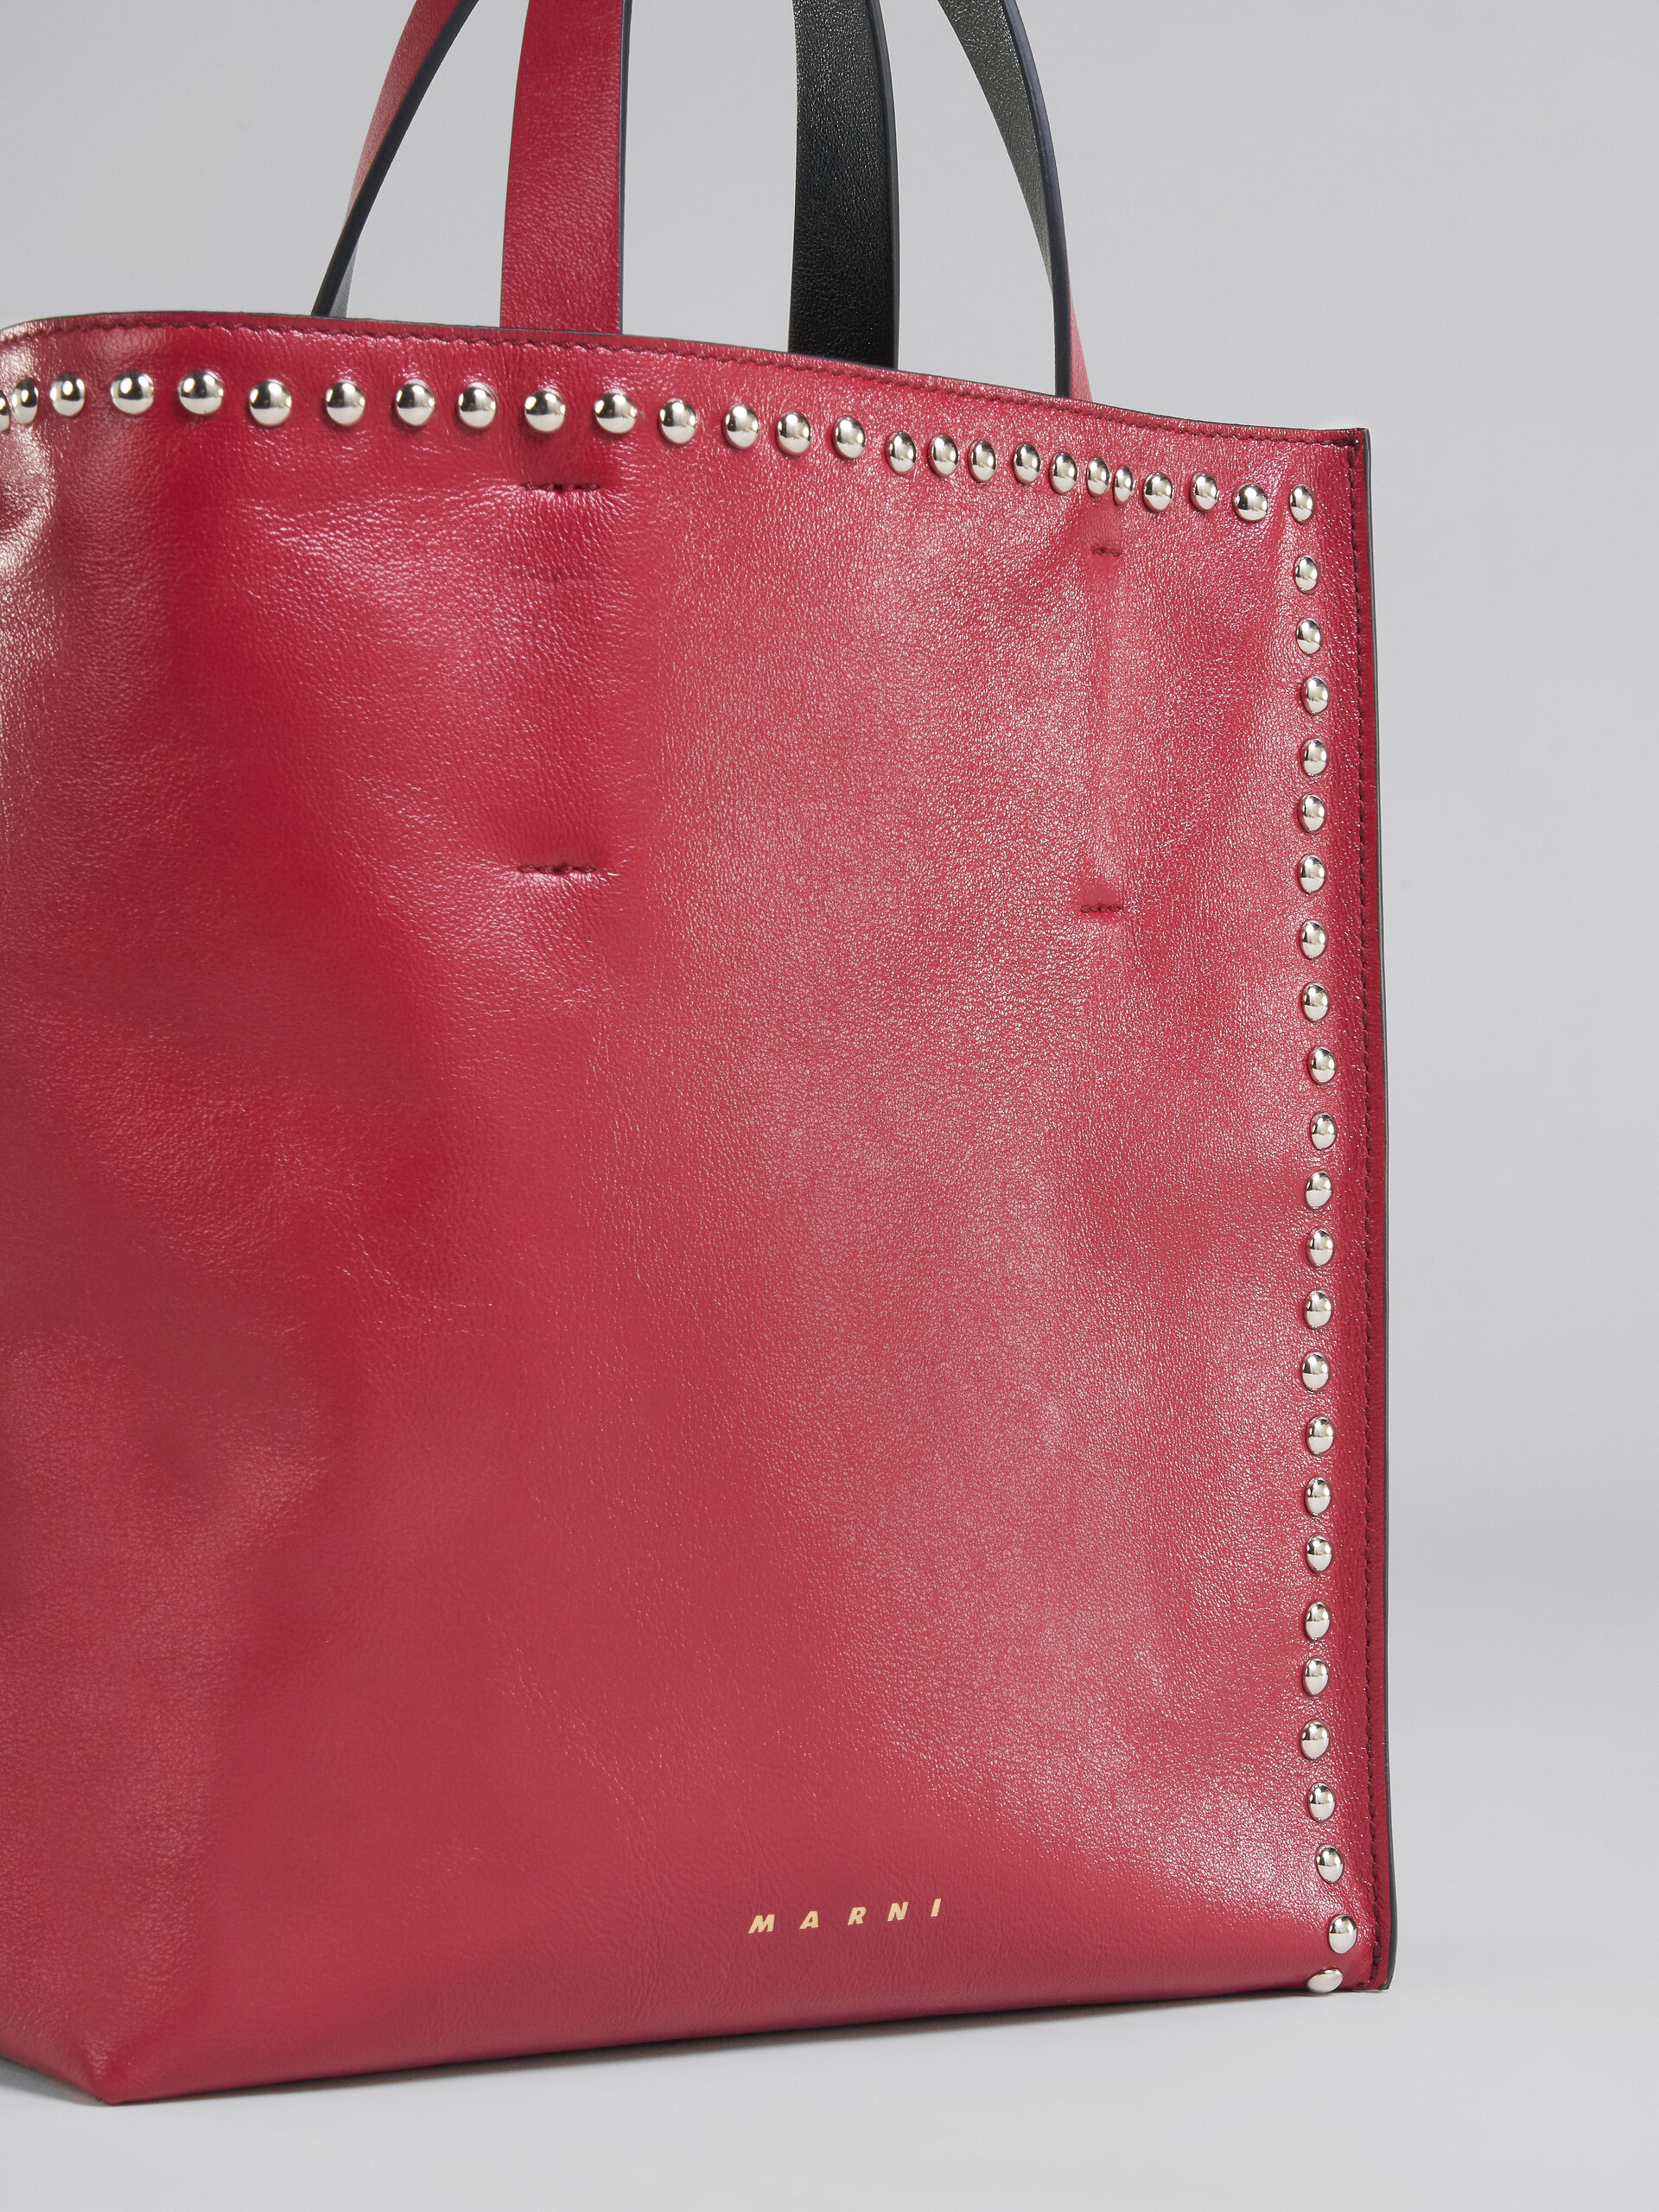 Museo Soft Small Bag in red and black leather with studs - Shopping Bags - Image 5